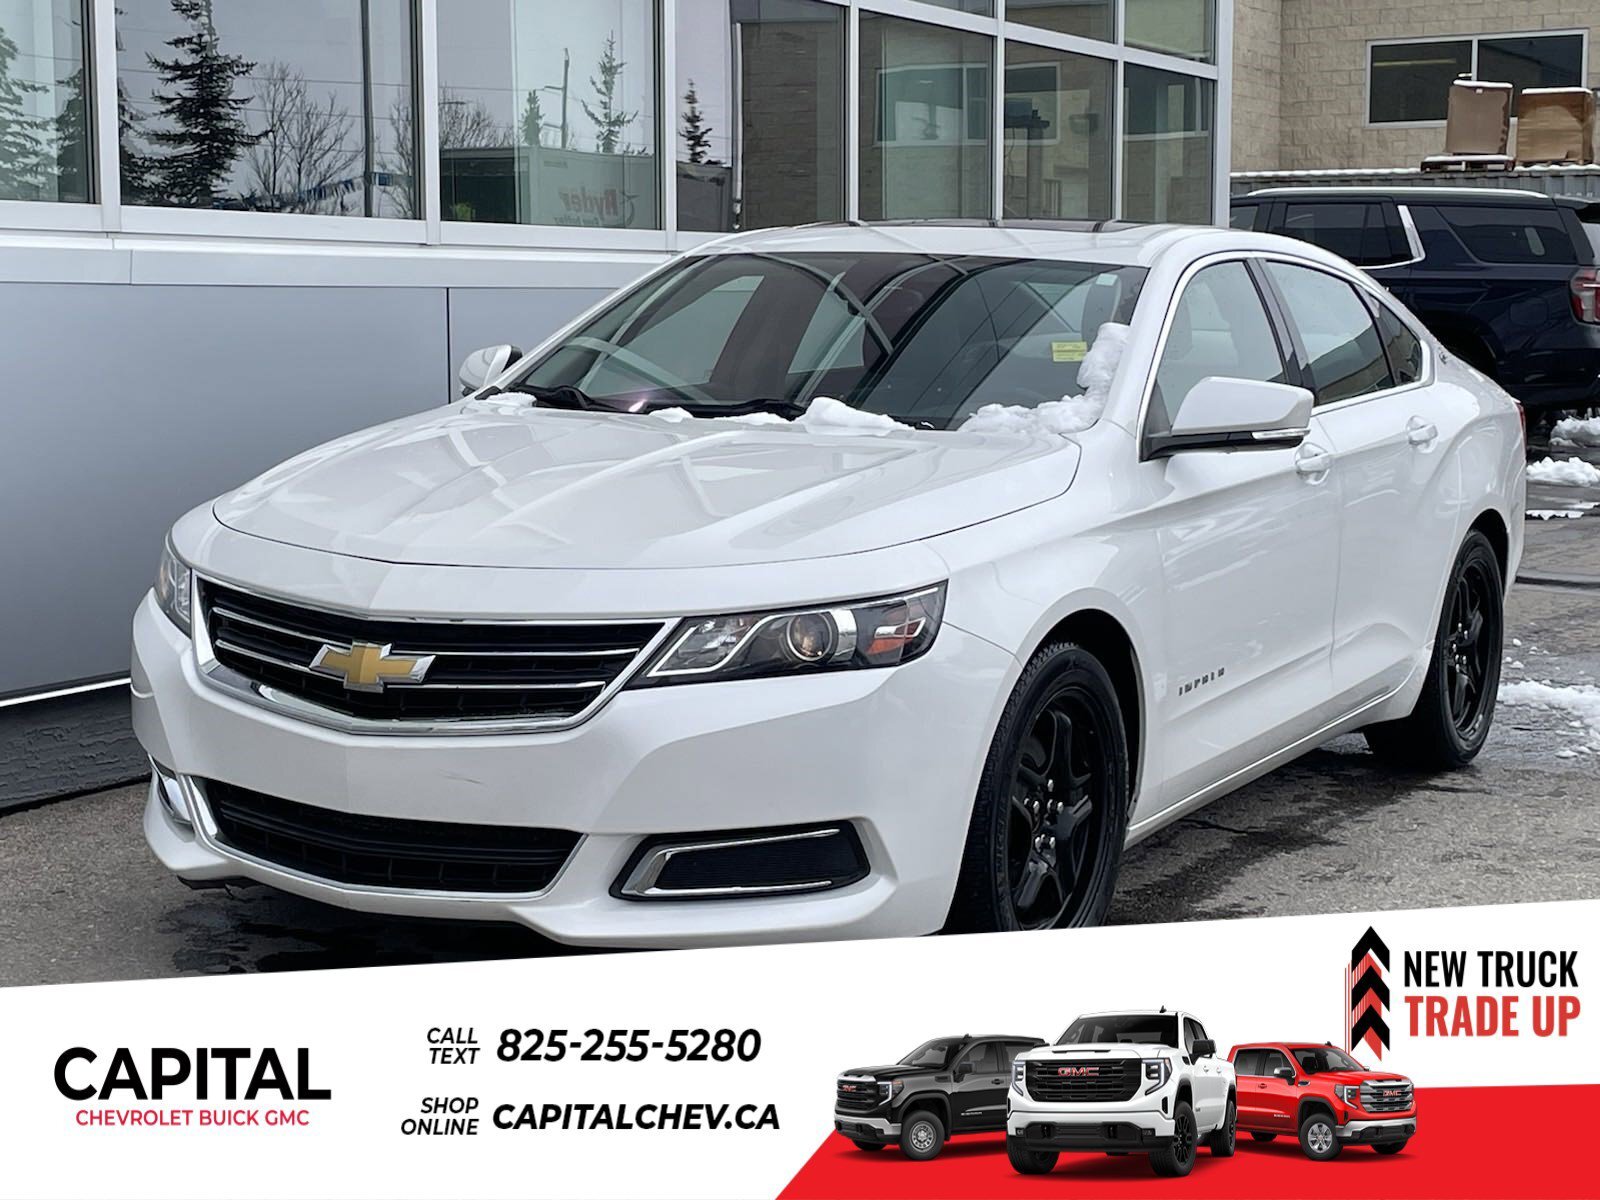 2015 Chevrolet Impala LT+ Extra set for Rims & Tires + sunroof + remote 